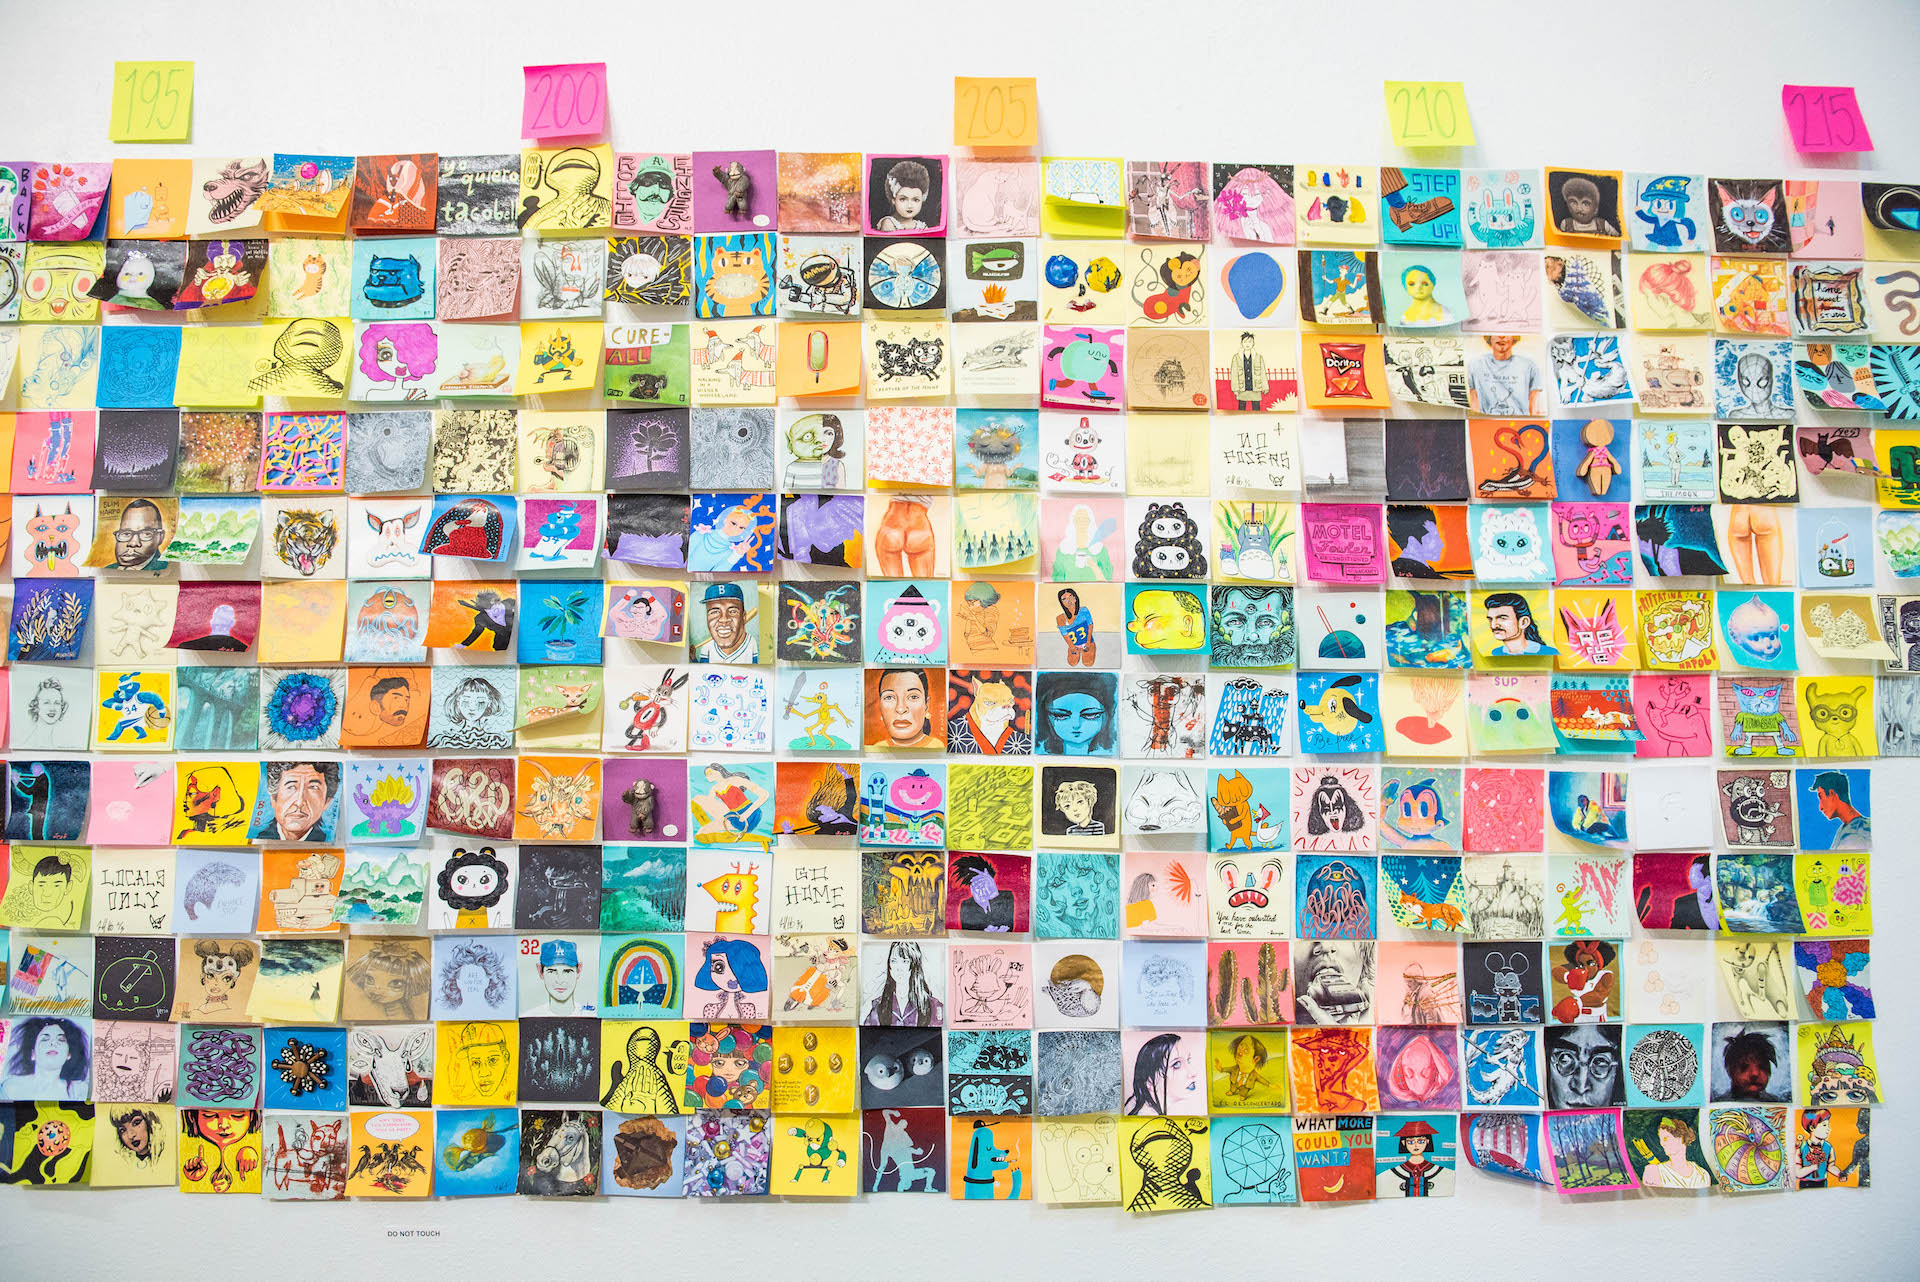 The Post-It Show — Giant Robot Media